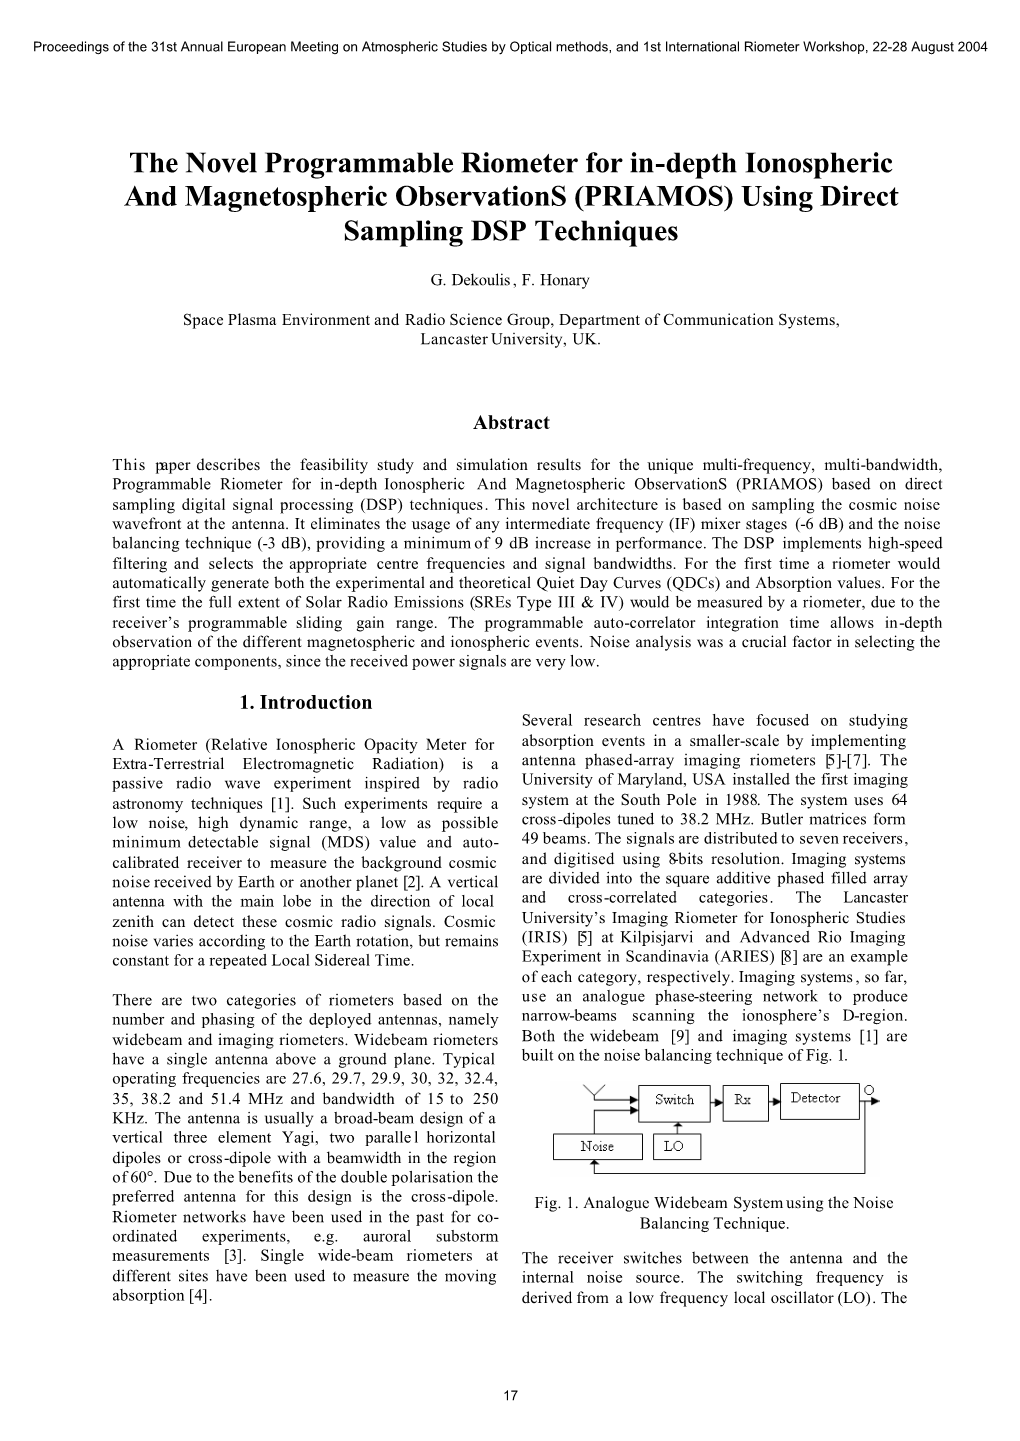 The Novel Programmable Riometer for In-Depth Ionospheric and Magnetospheric Observations (PRIAMOS) Using Direct Sampling DSP Techniques